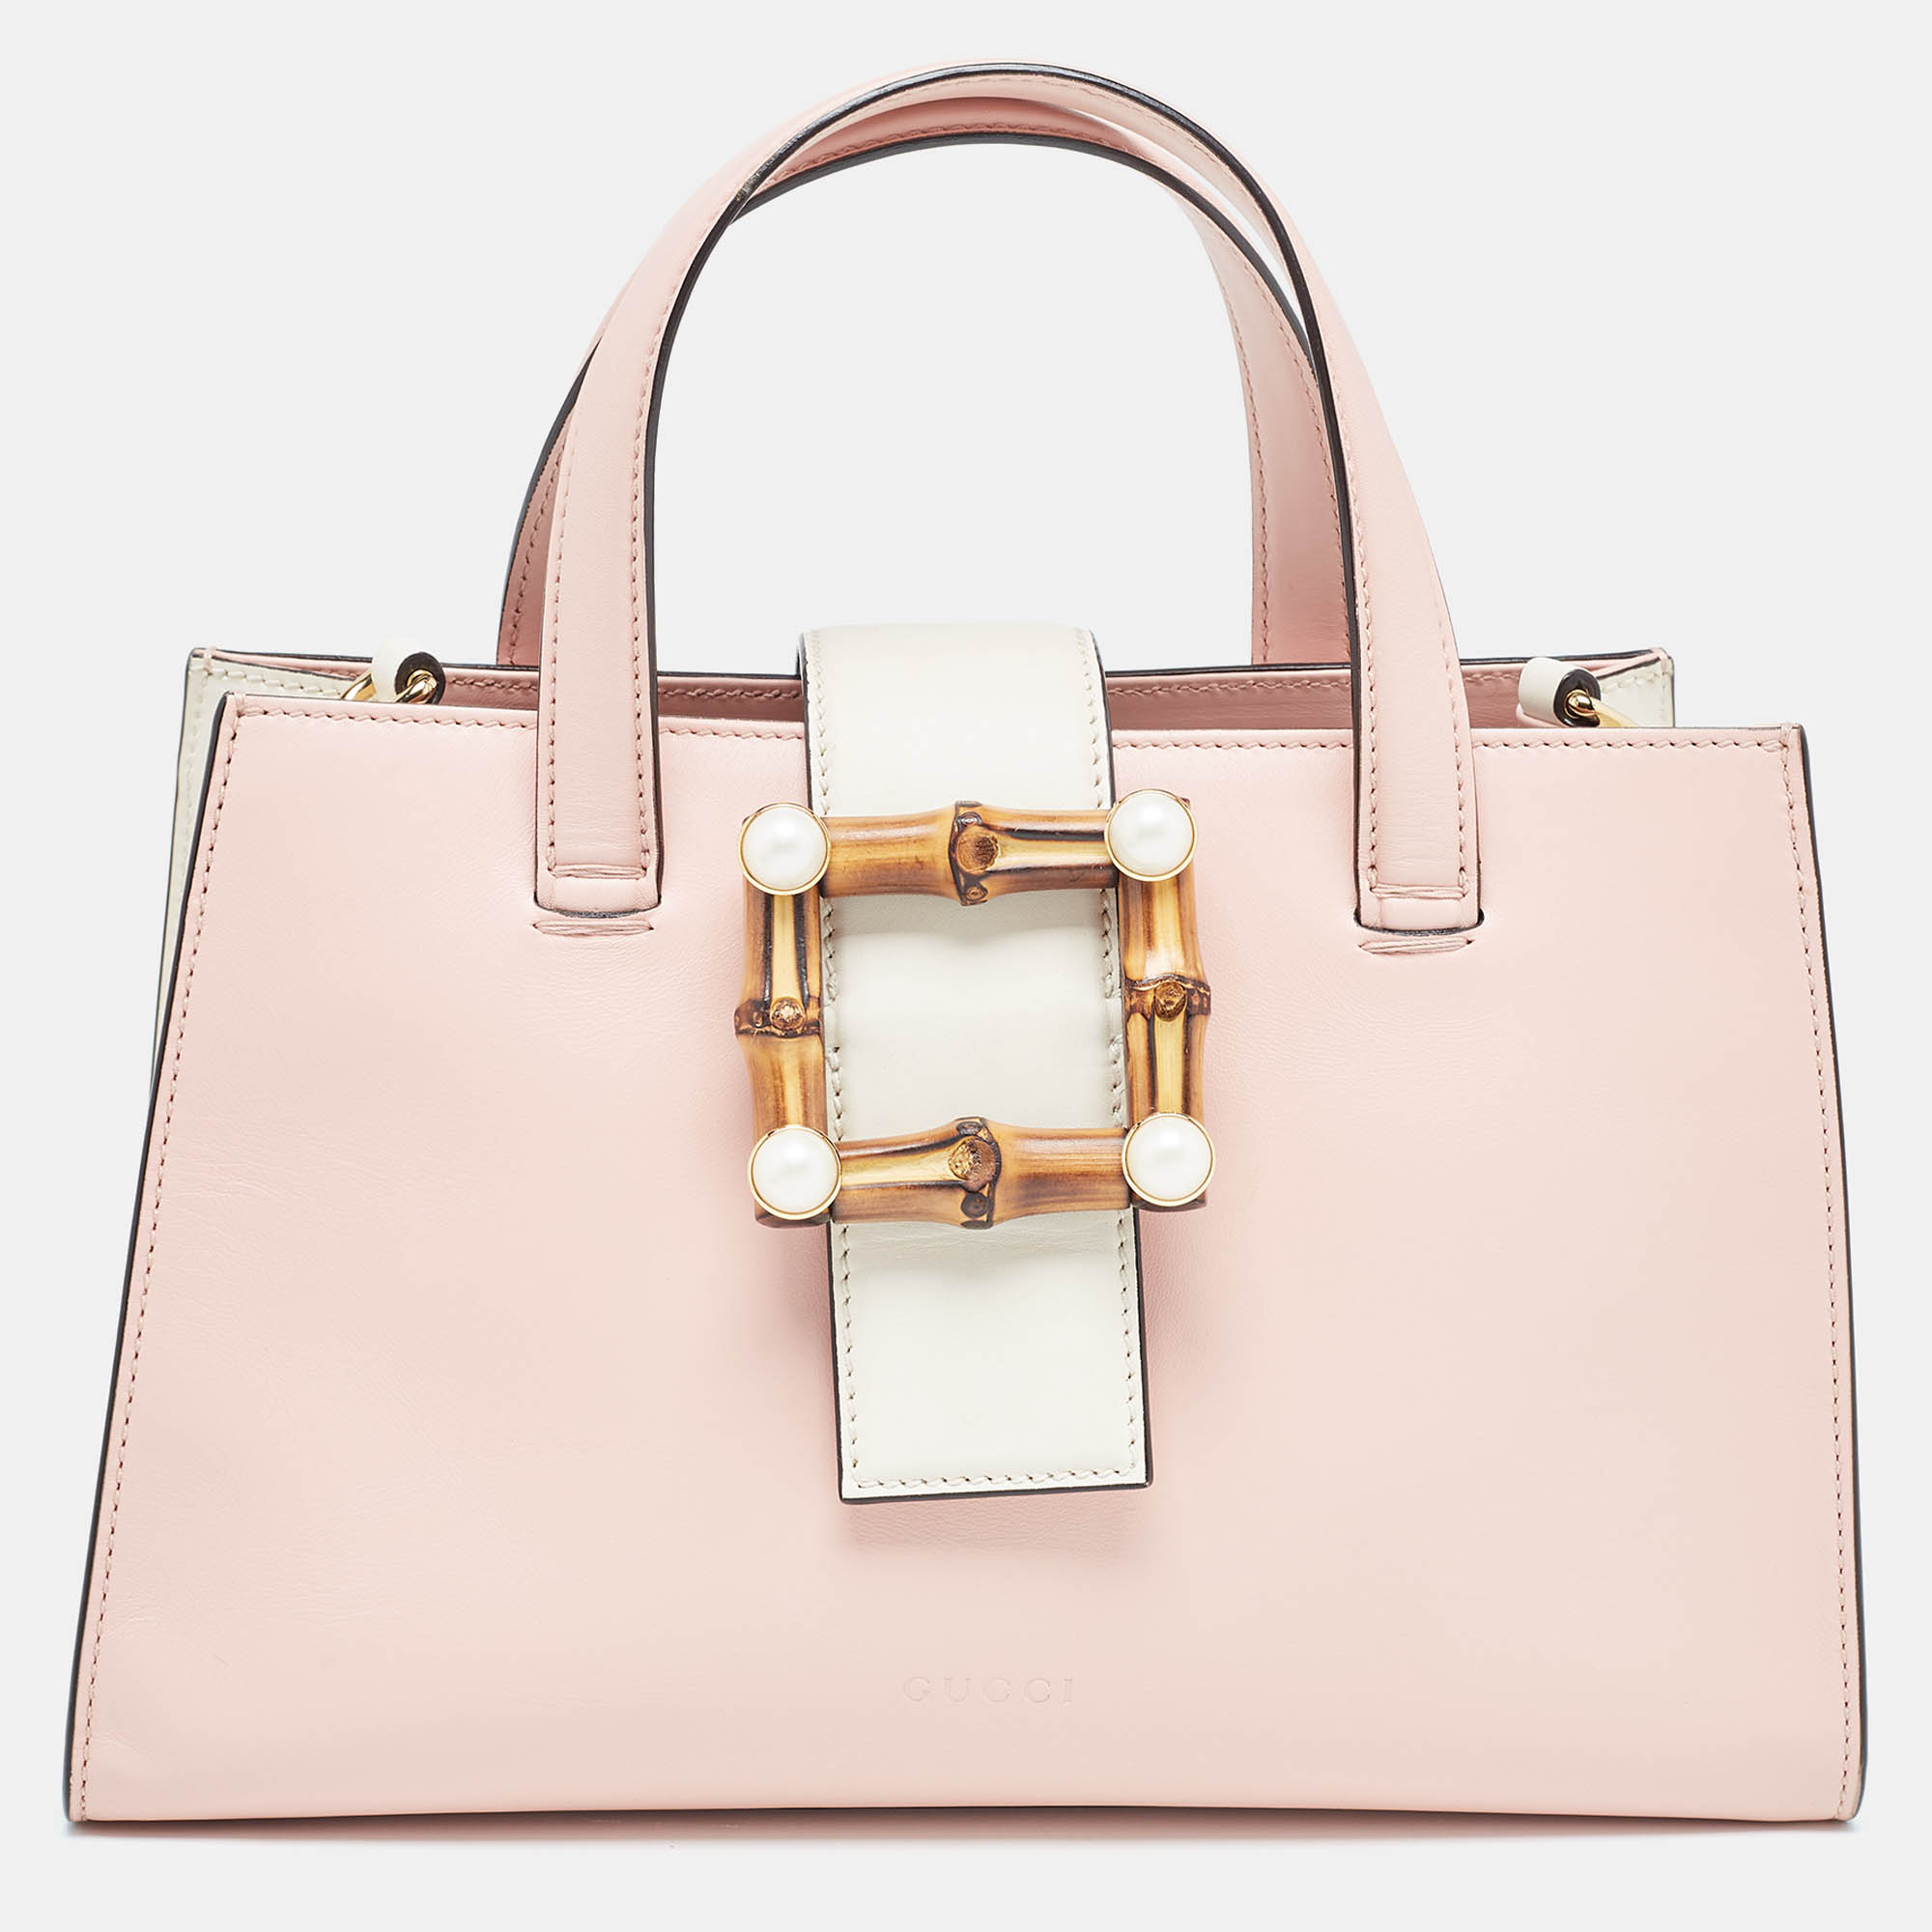  Gucci Pink/White Leather Small Nimfair Tote